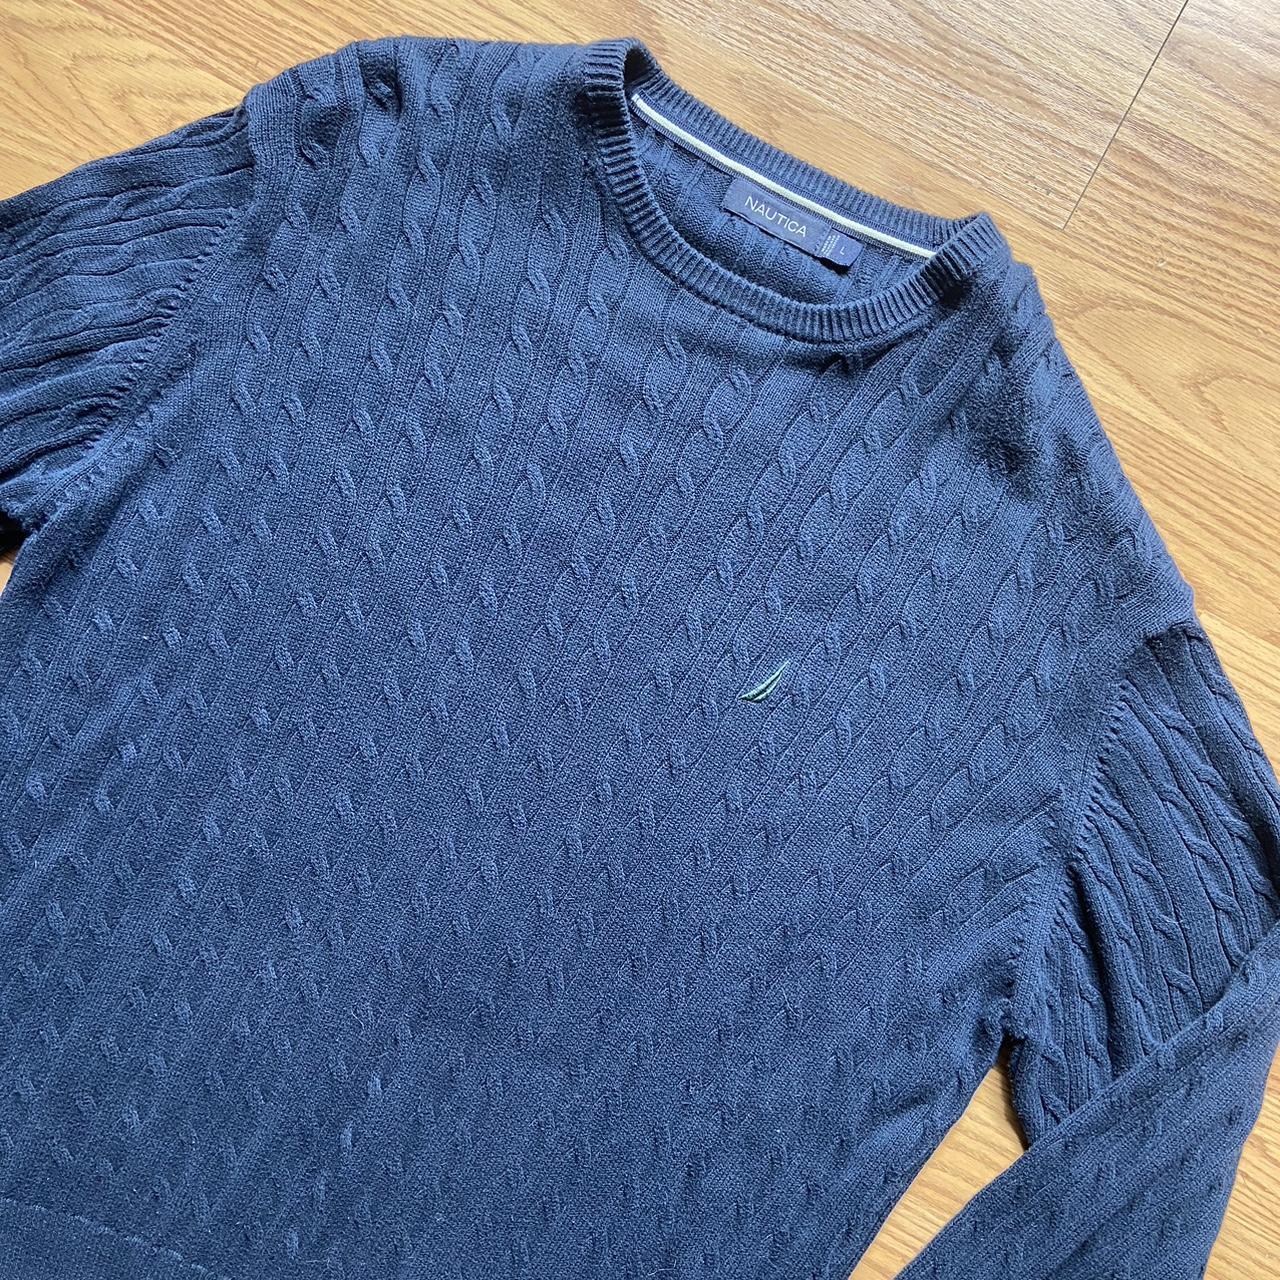 Navy knit sweater. From nautica. Preppy look comfy - Depop